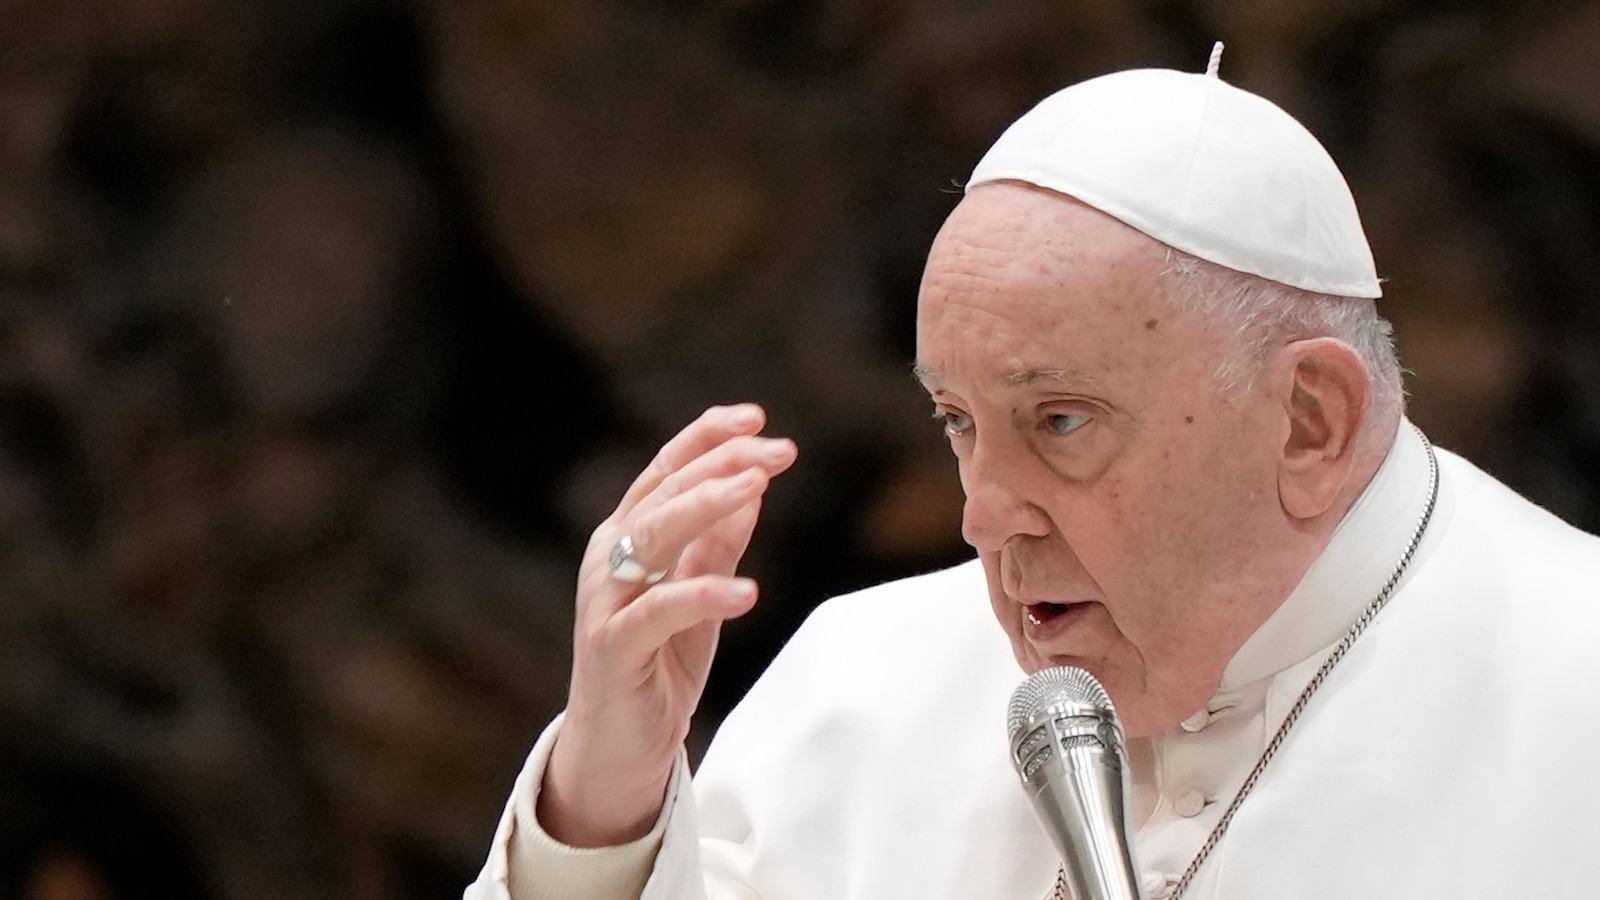 The Pope emphasizes the significance of Holocaust Remembrance Day in highlighting the perpetual injustice of war